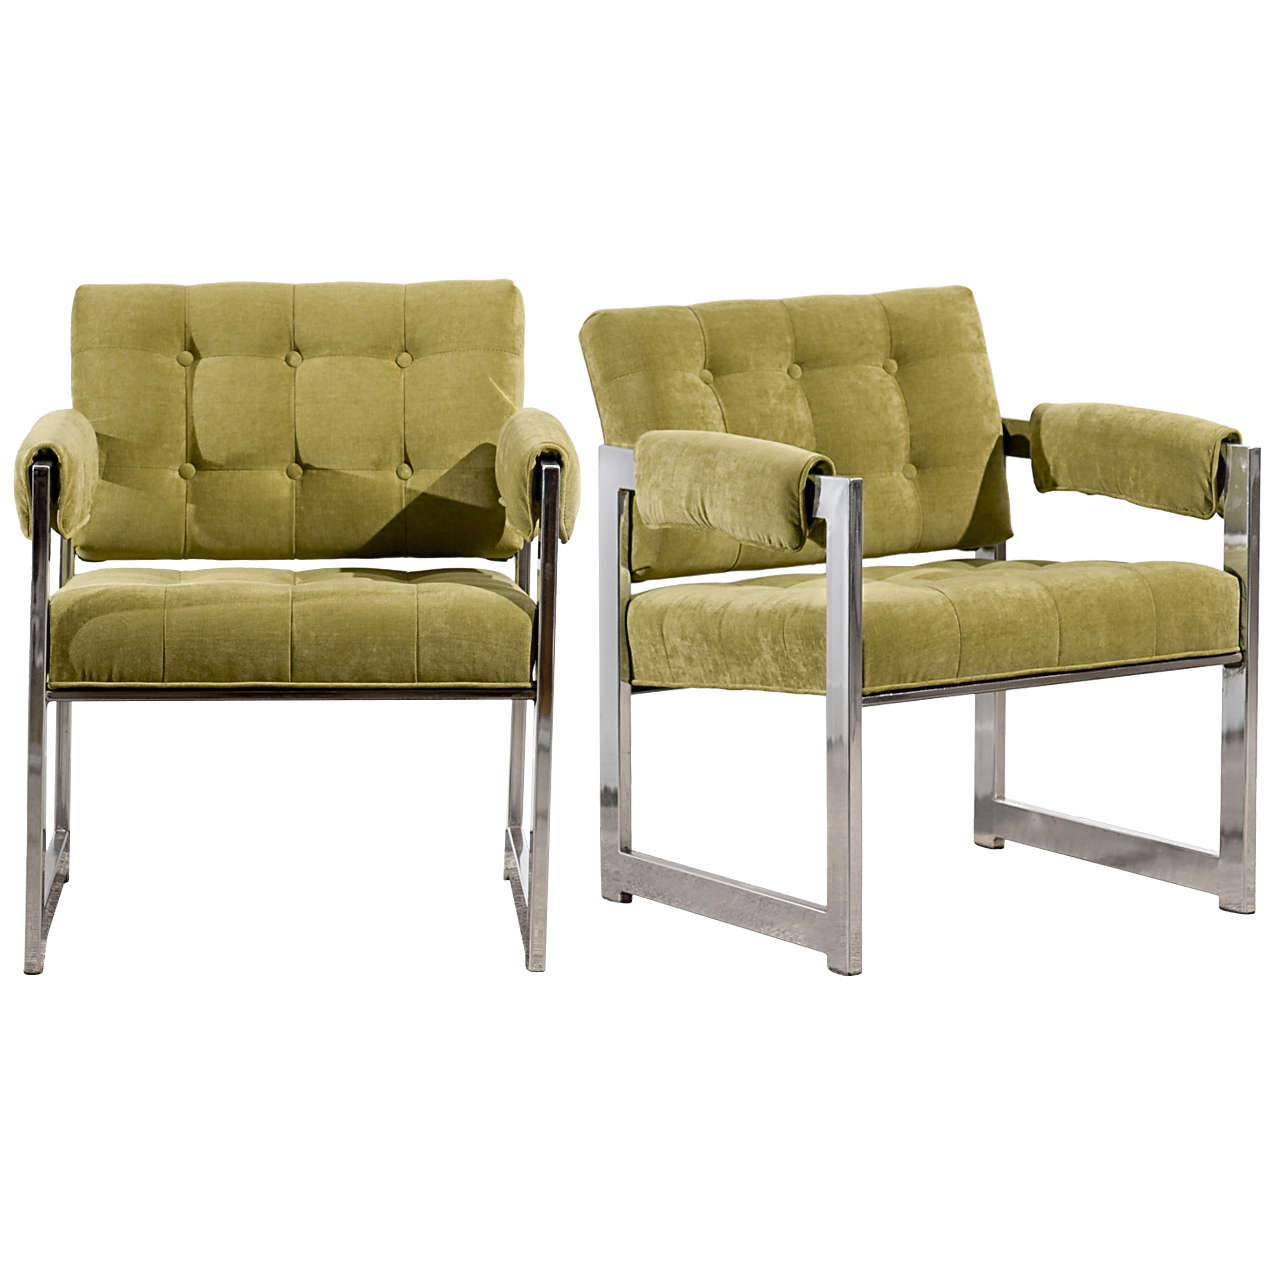 Stylish Pair of Milo Baughman Style Lounge Chairs in Lime Chenille, circa 1975 For Sale